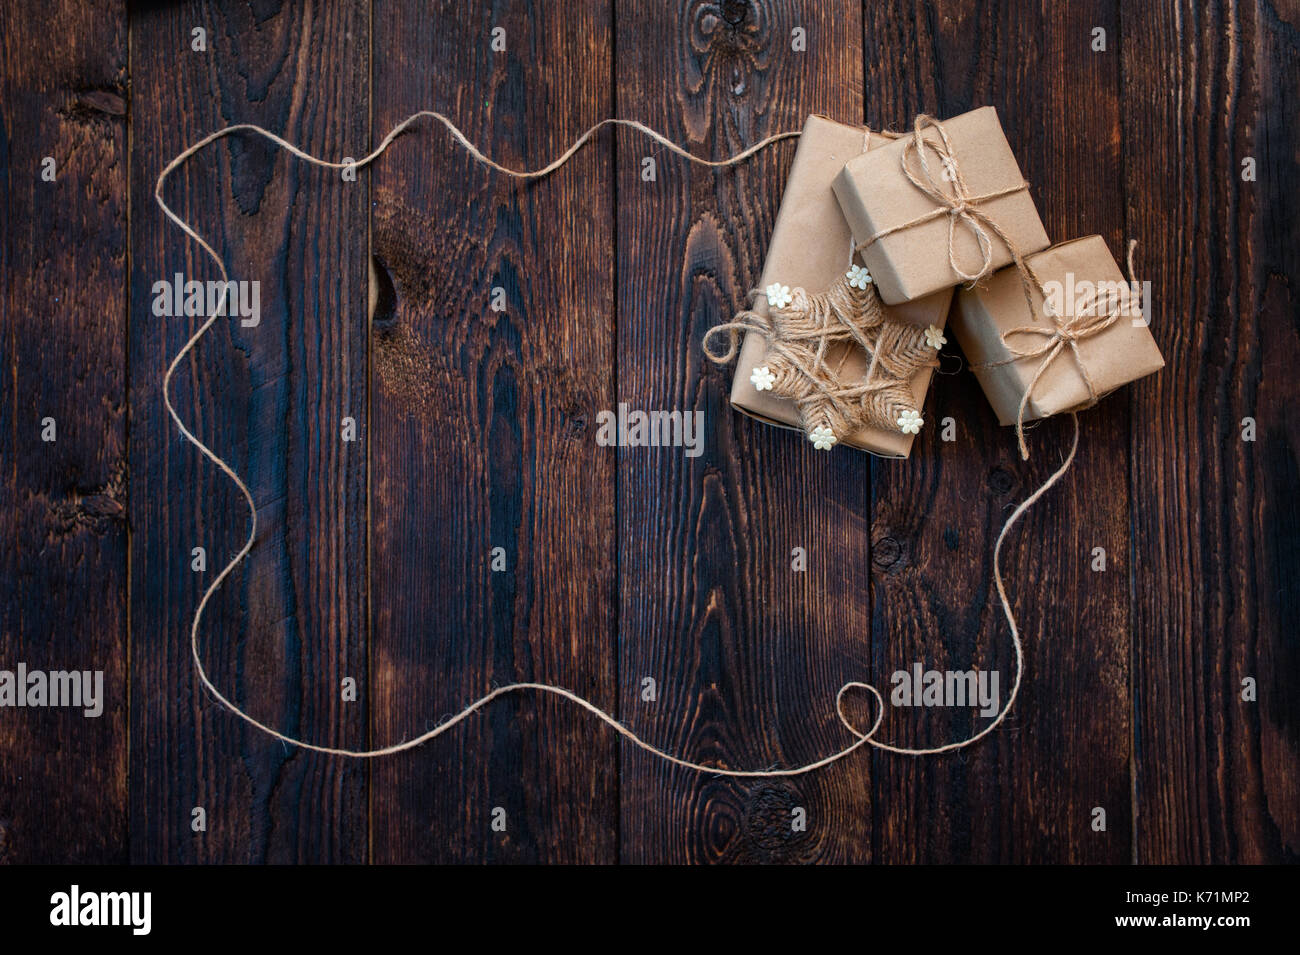 gift christmas boxes on a wooden background Stock Photo